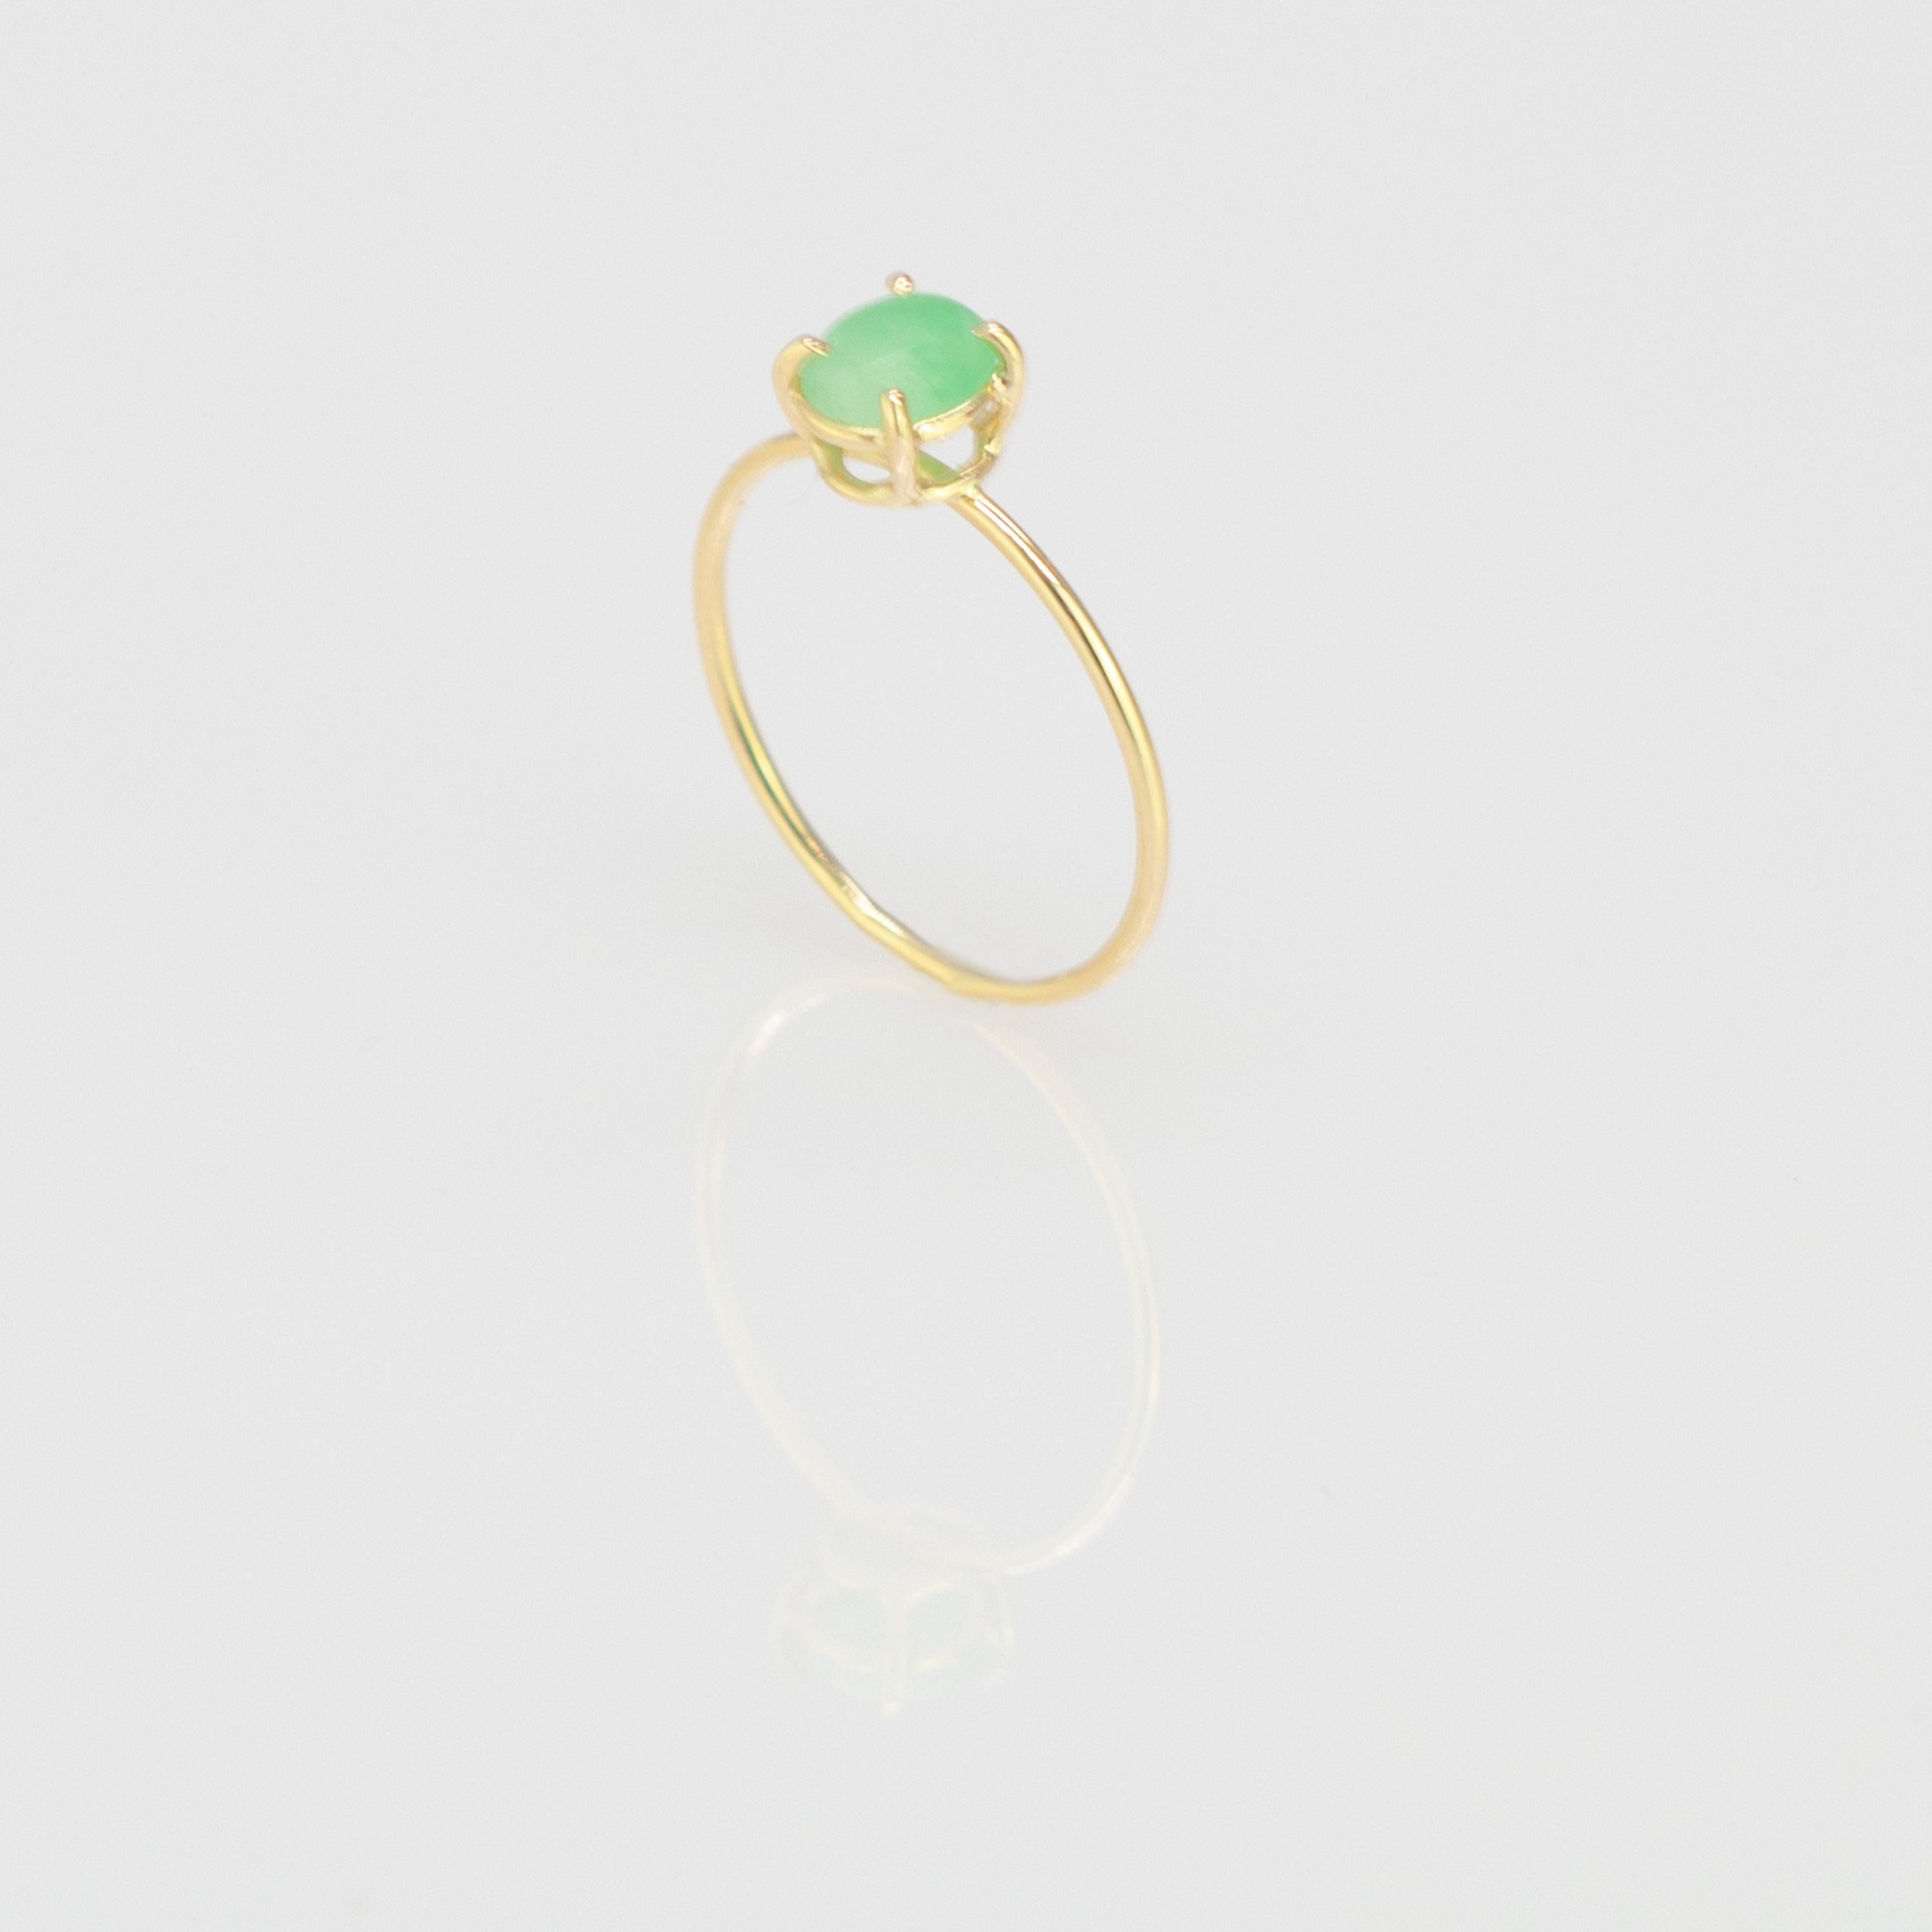 Oval cabochon cut solitaire ring design. 0.7 carats natural jade on 18 karat yellow gold ring inspired by the joy of afternoons with friends. With a perfect size, it will fill with your daily elegant outfits.

This jewellery piece is inspired by its